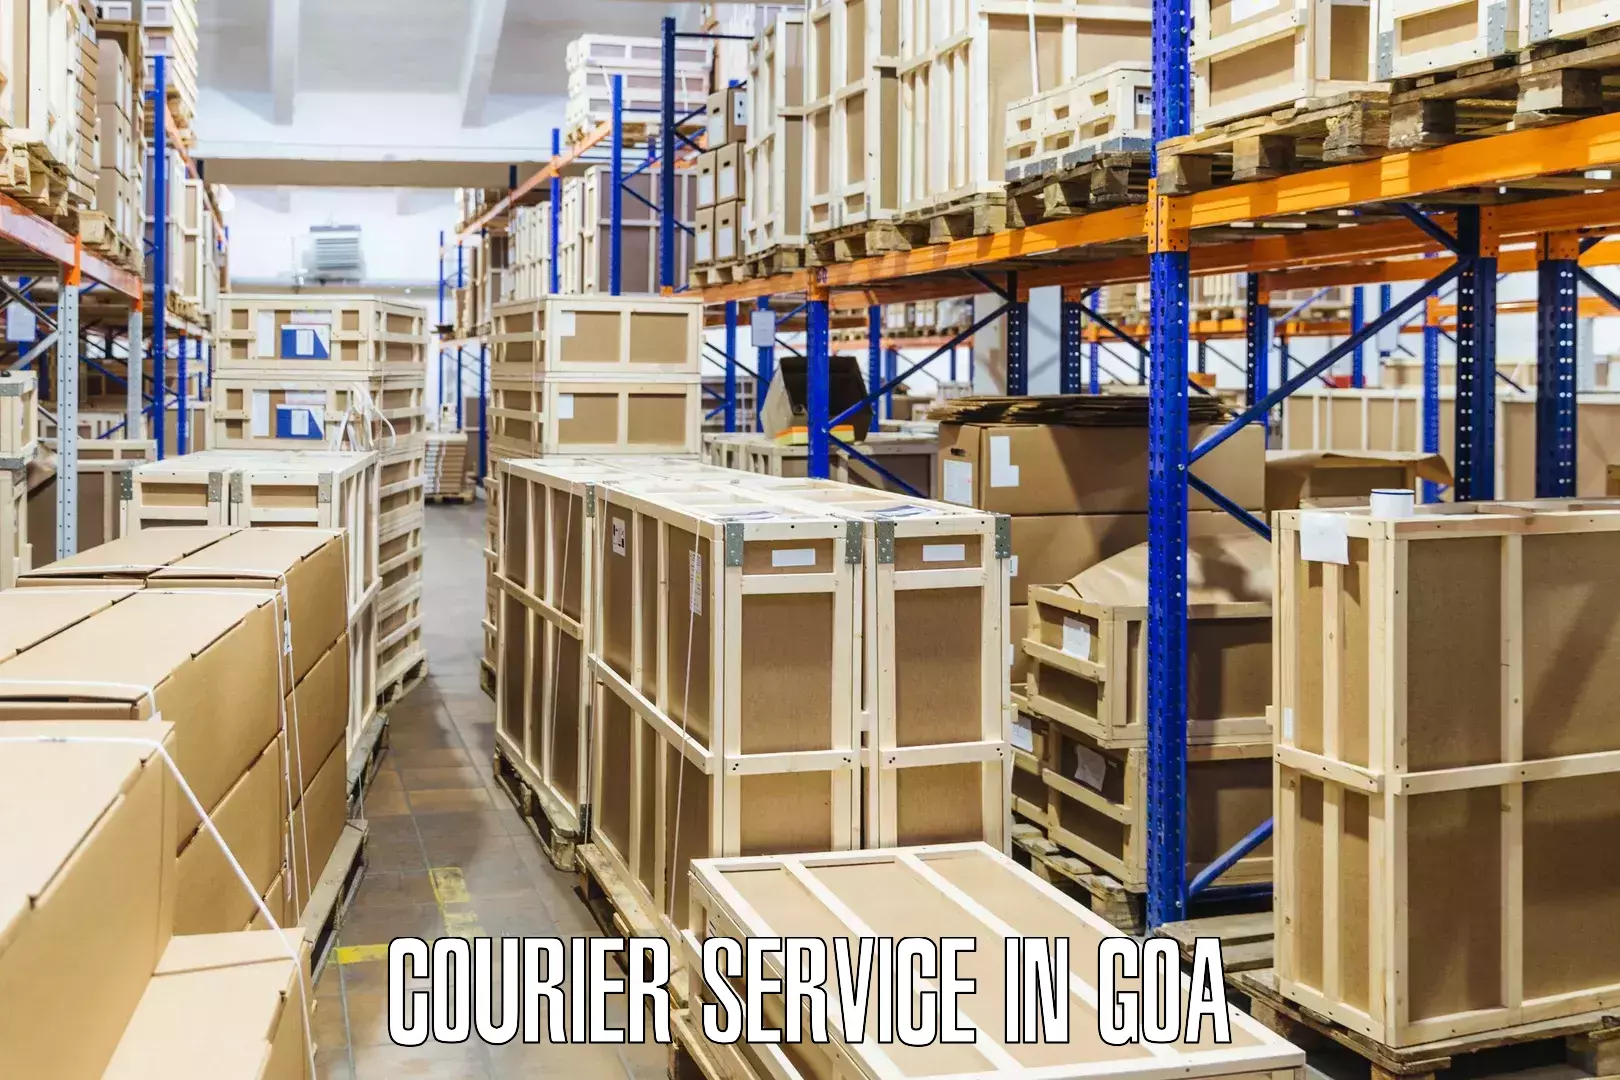 Courier services in Goa